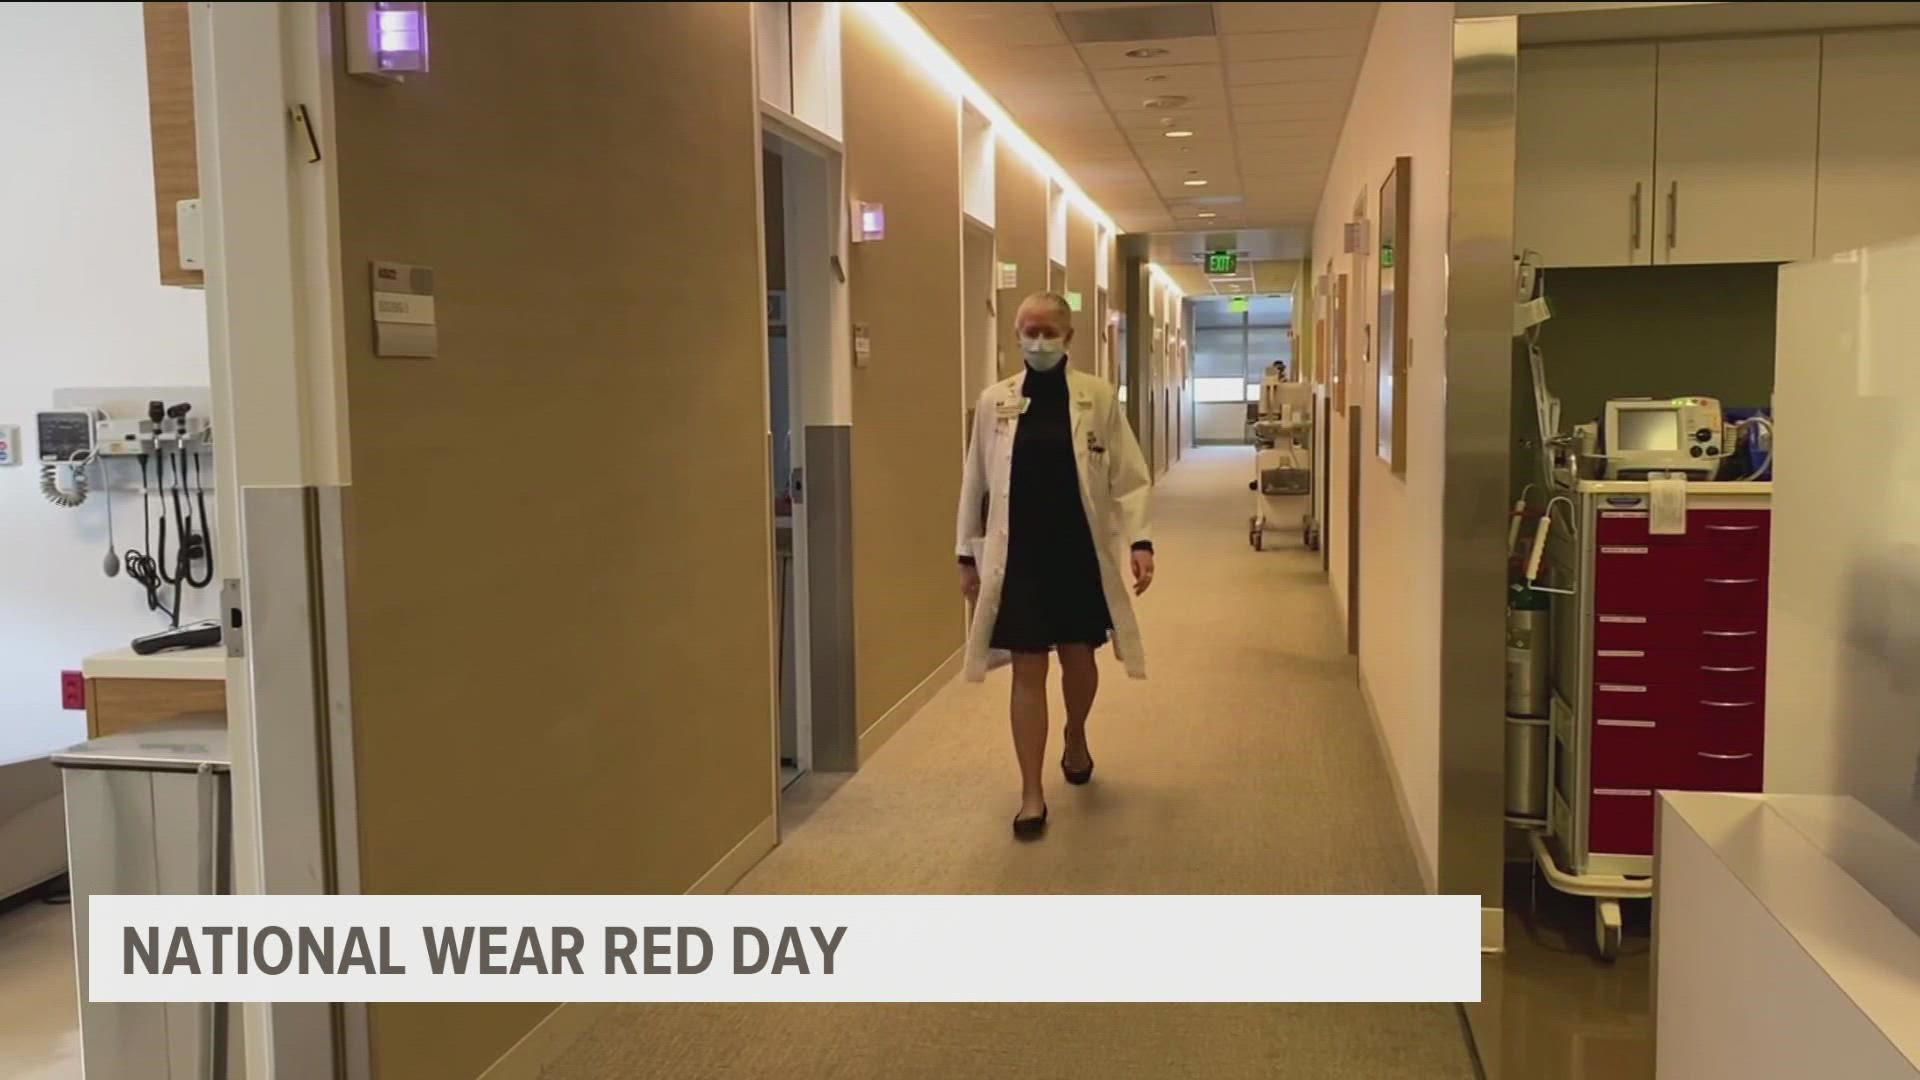 It's National Wear Red Day, bringing awareness to Cardiovascular disease. It's the No. 1 killer in women, more than any cancer combined.